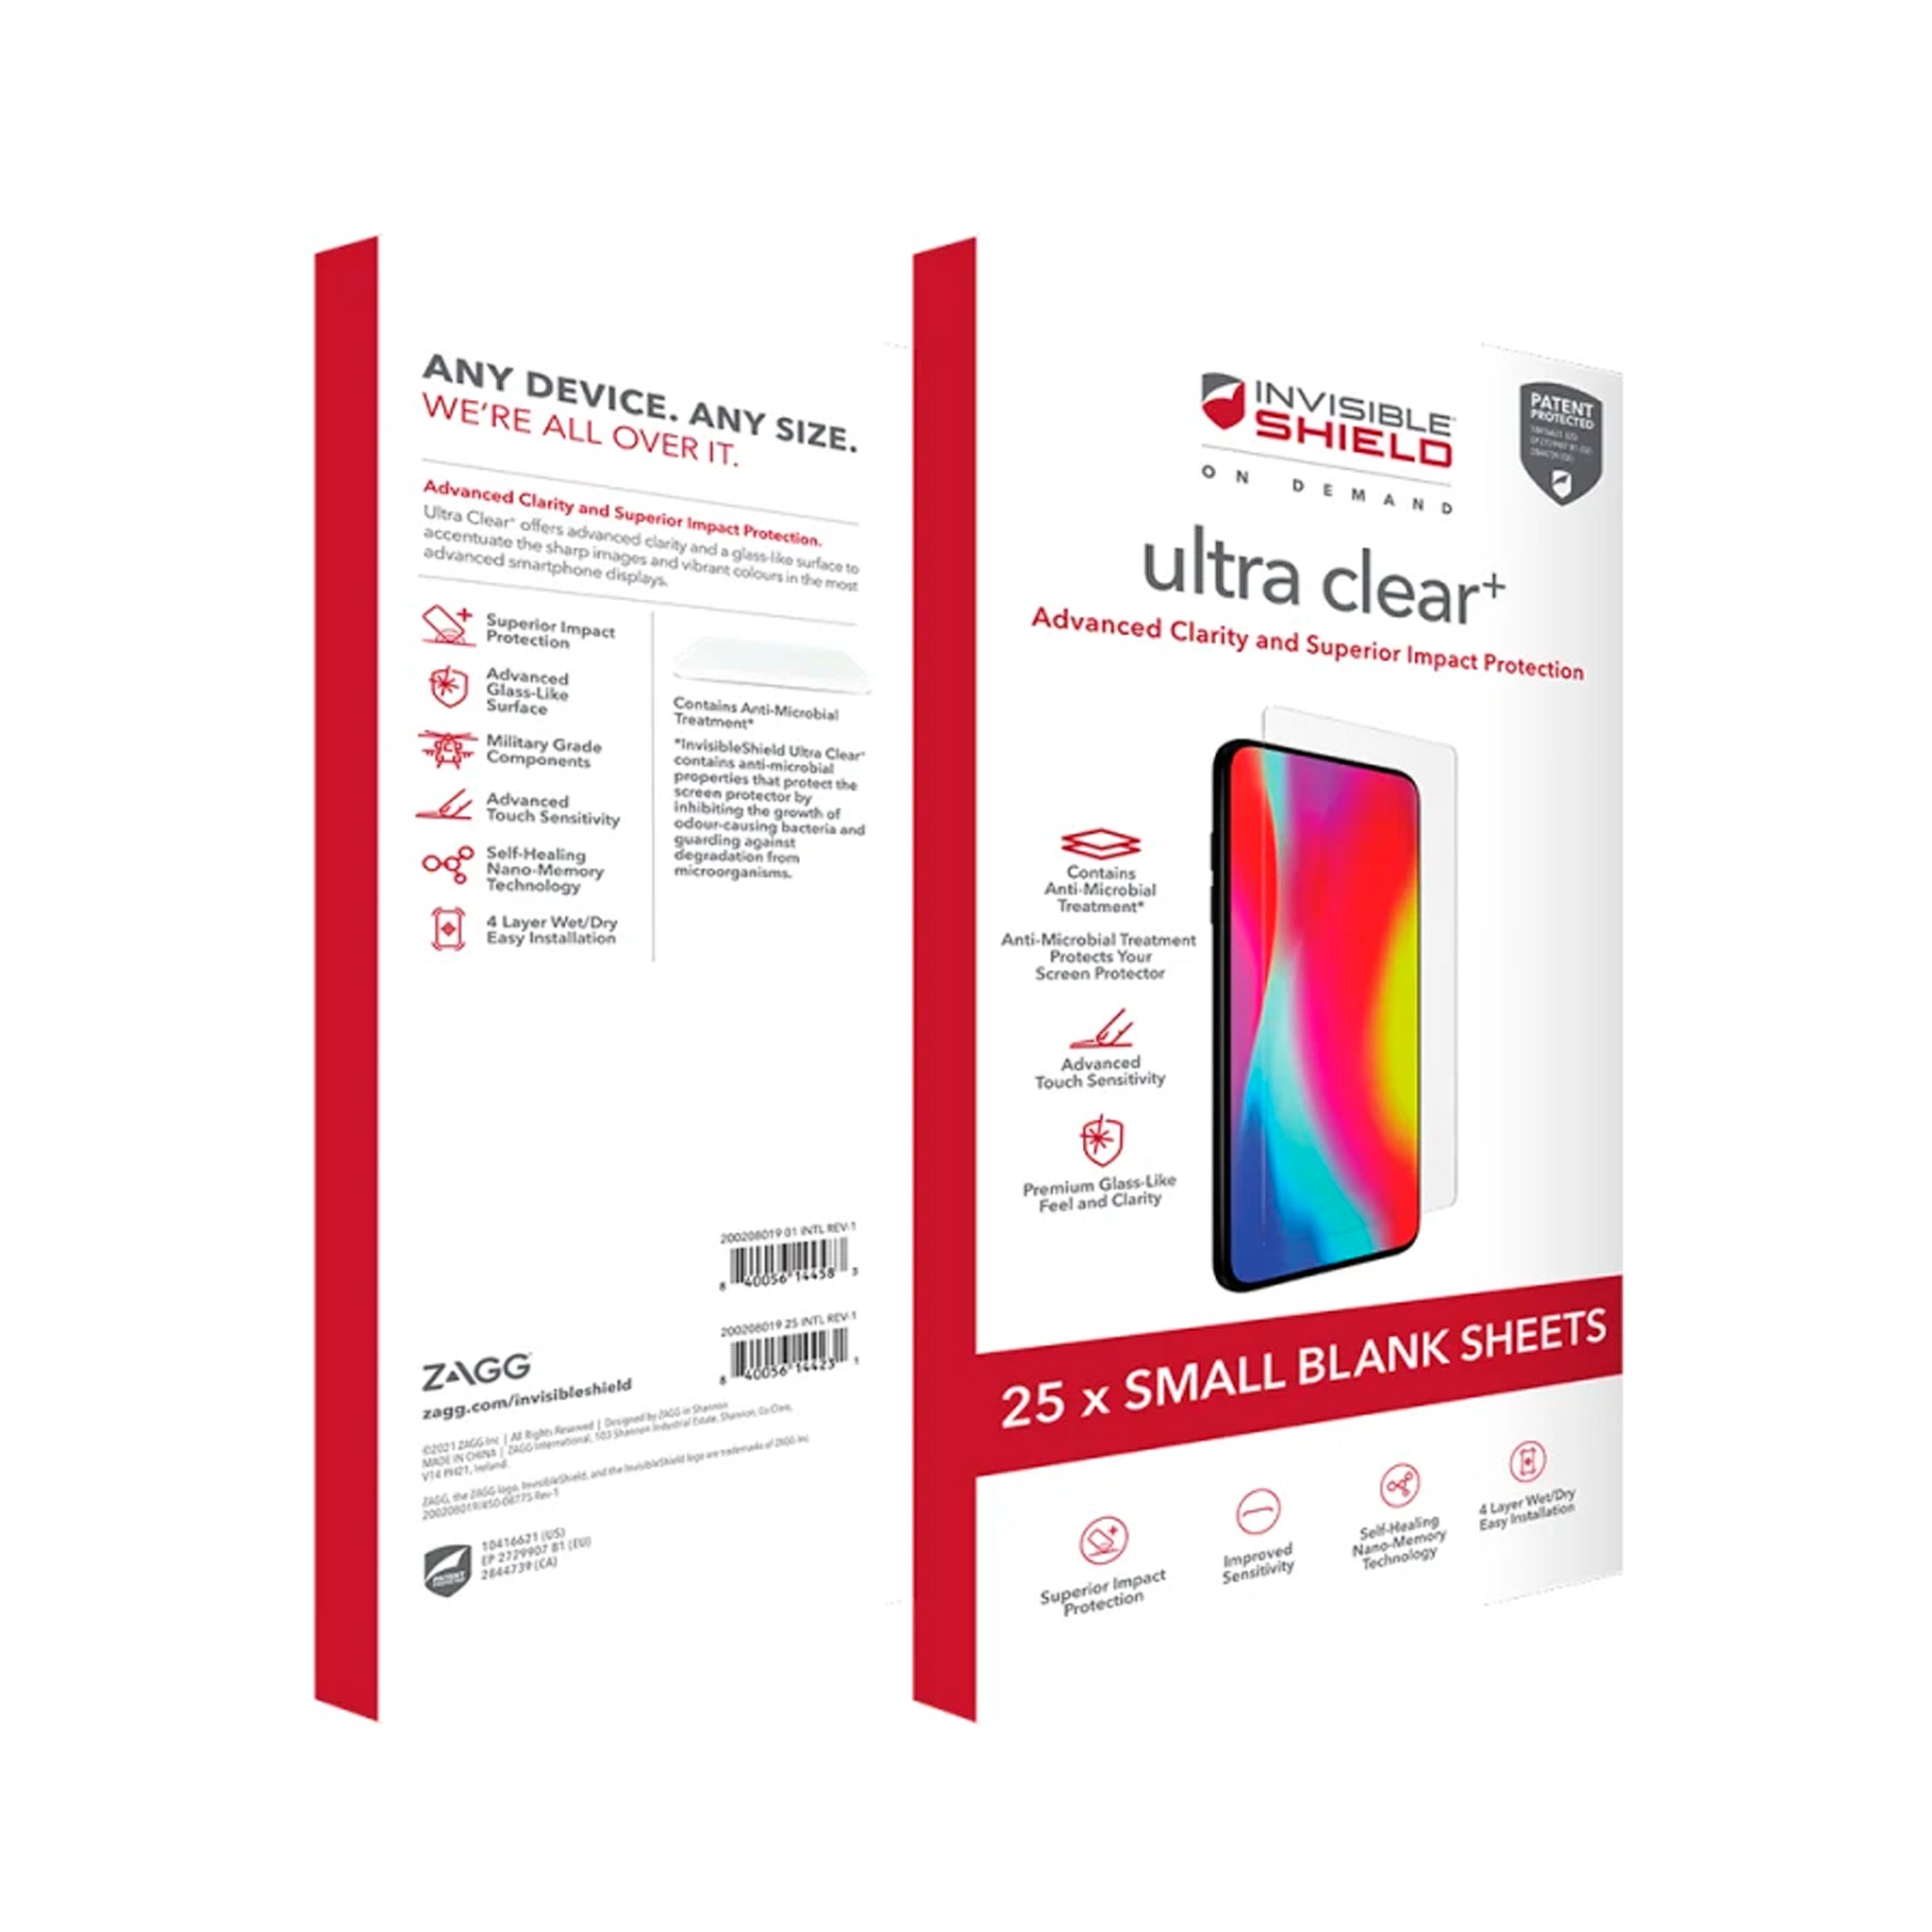 Zagg - Isod Ultra Clear Plus 4 Layer Film Screen Protector 25 Pack For Small Screens - Clear